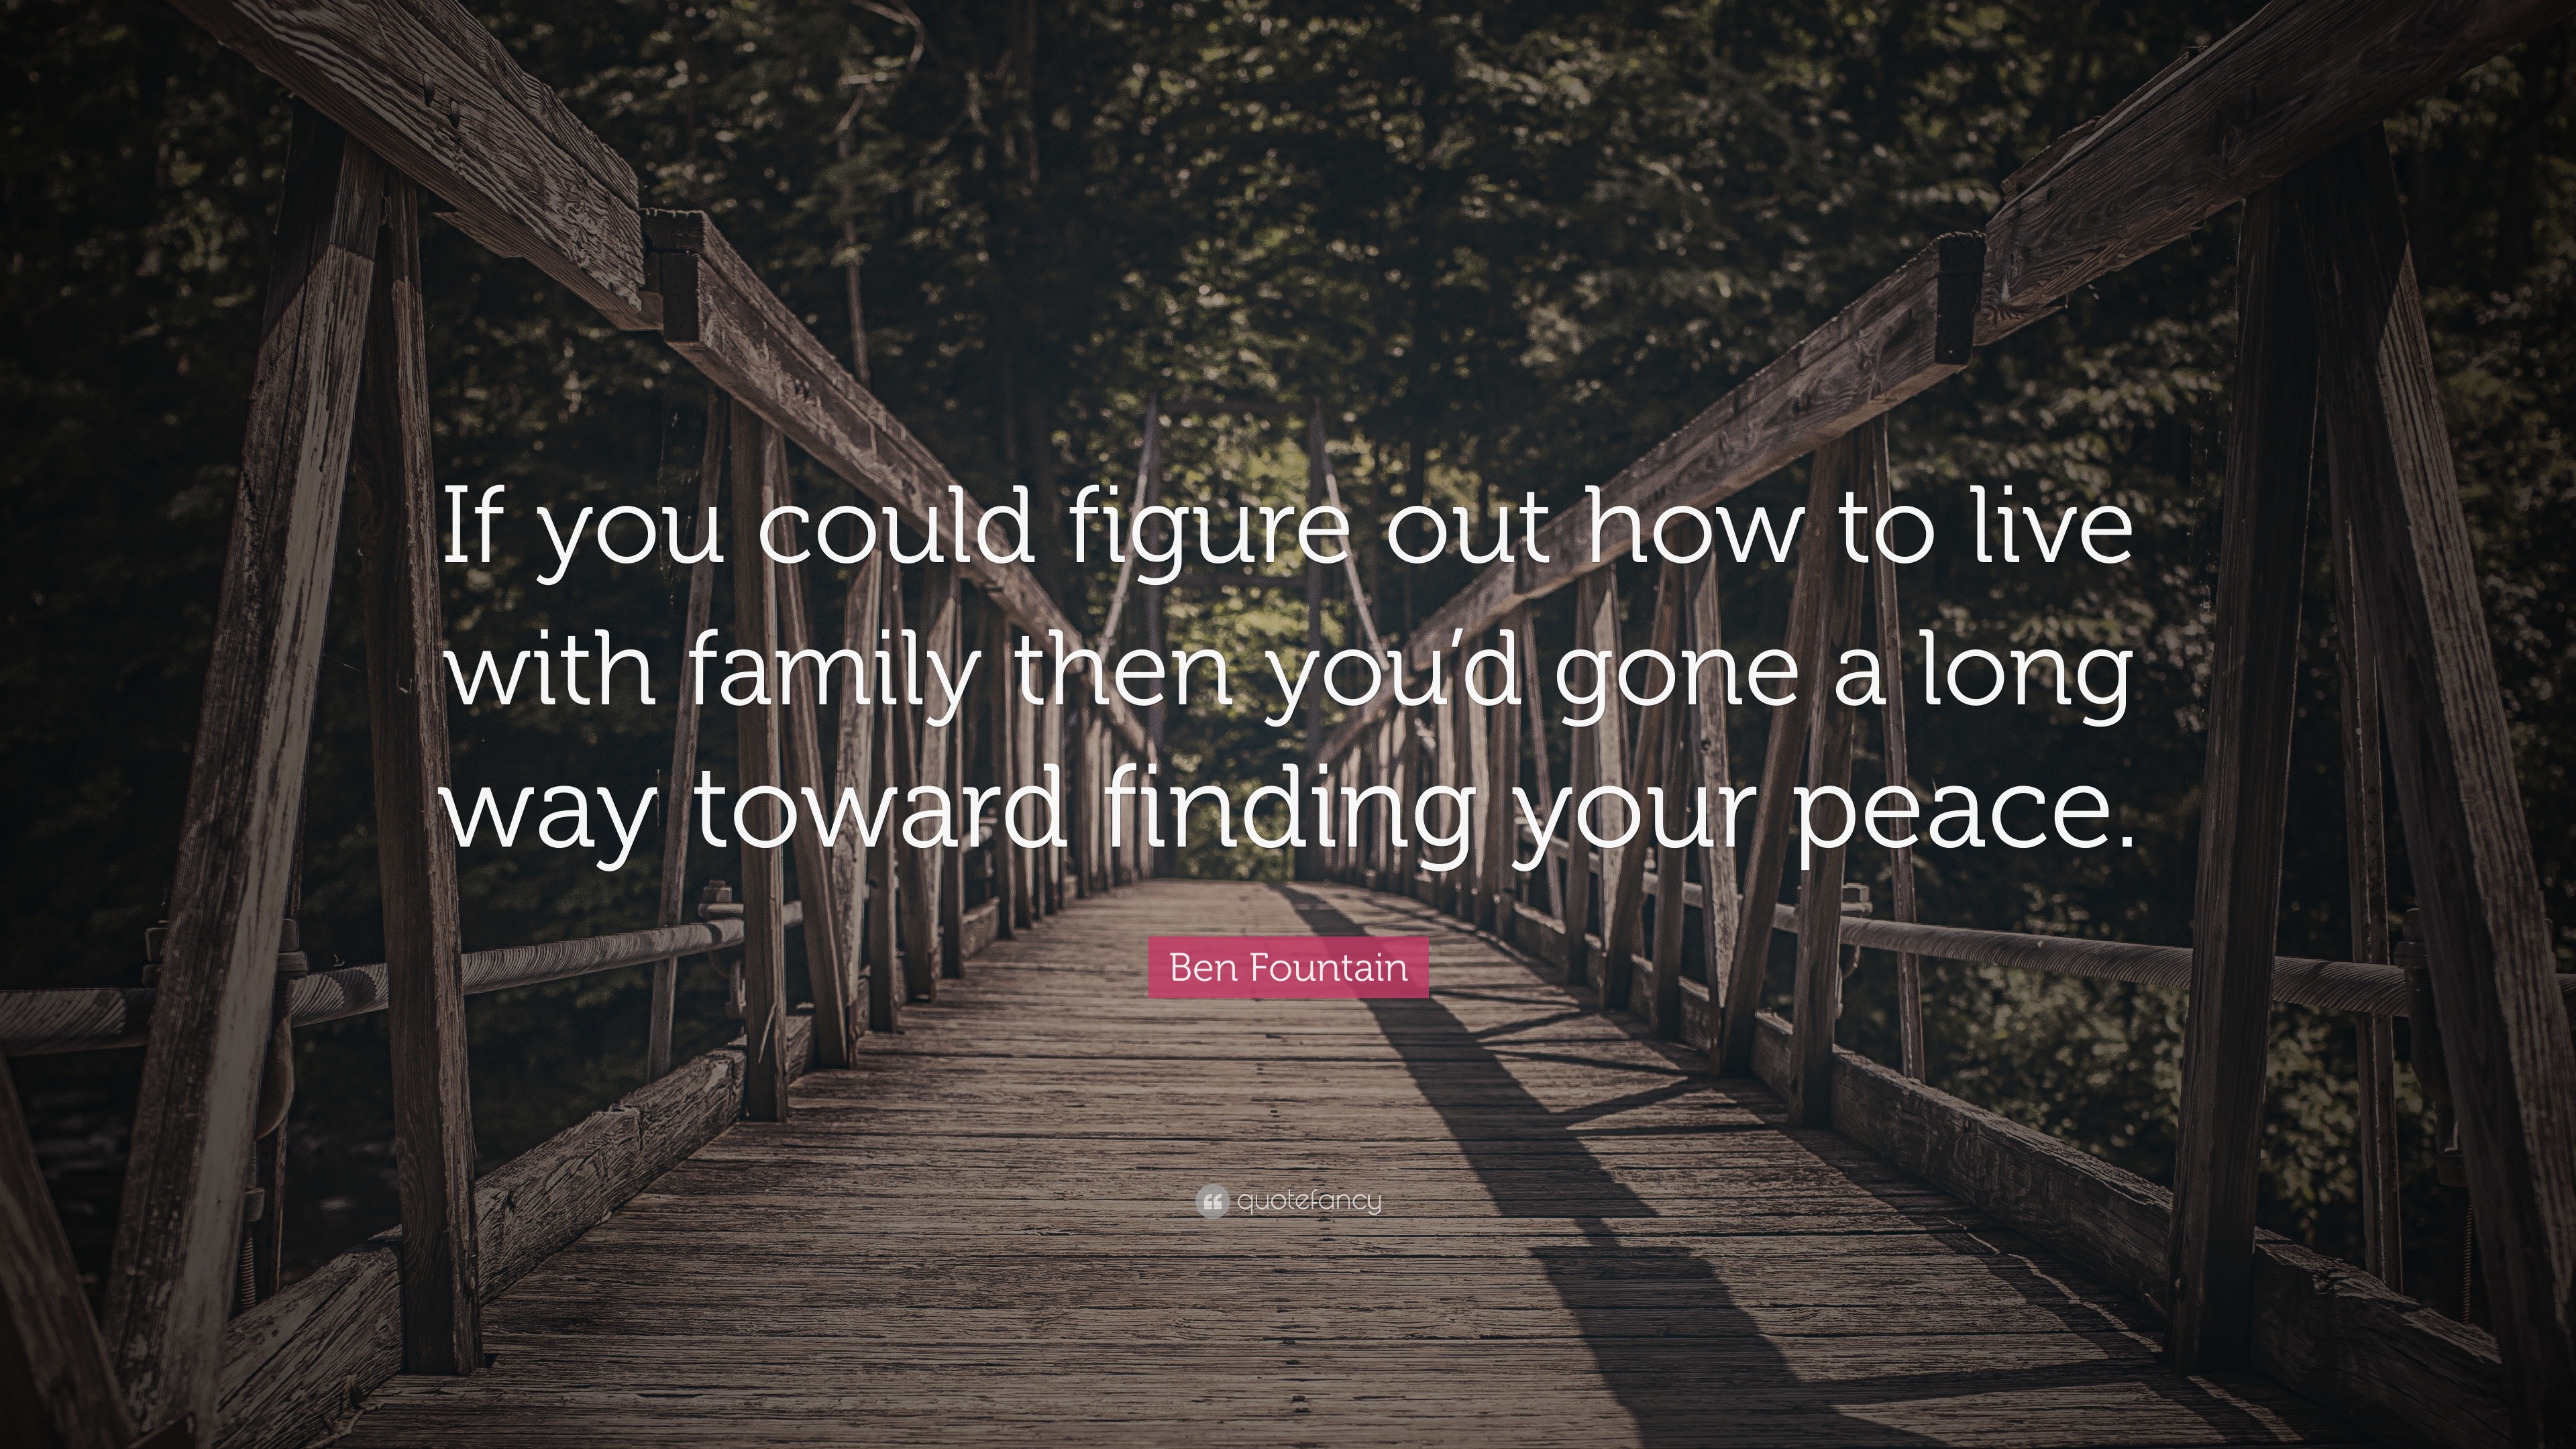 Ben Fountain Quote If You Could Figure Out How To Live With Family Then You D Gone A Long Way Toward Finding Your Peace 7 Wallpapers Quotefancy